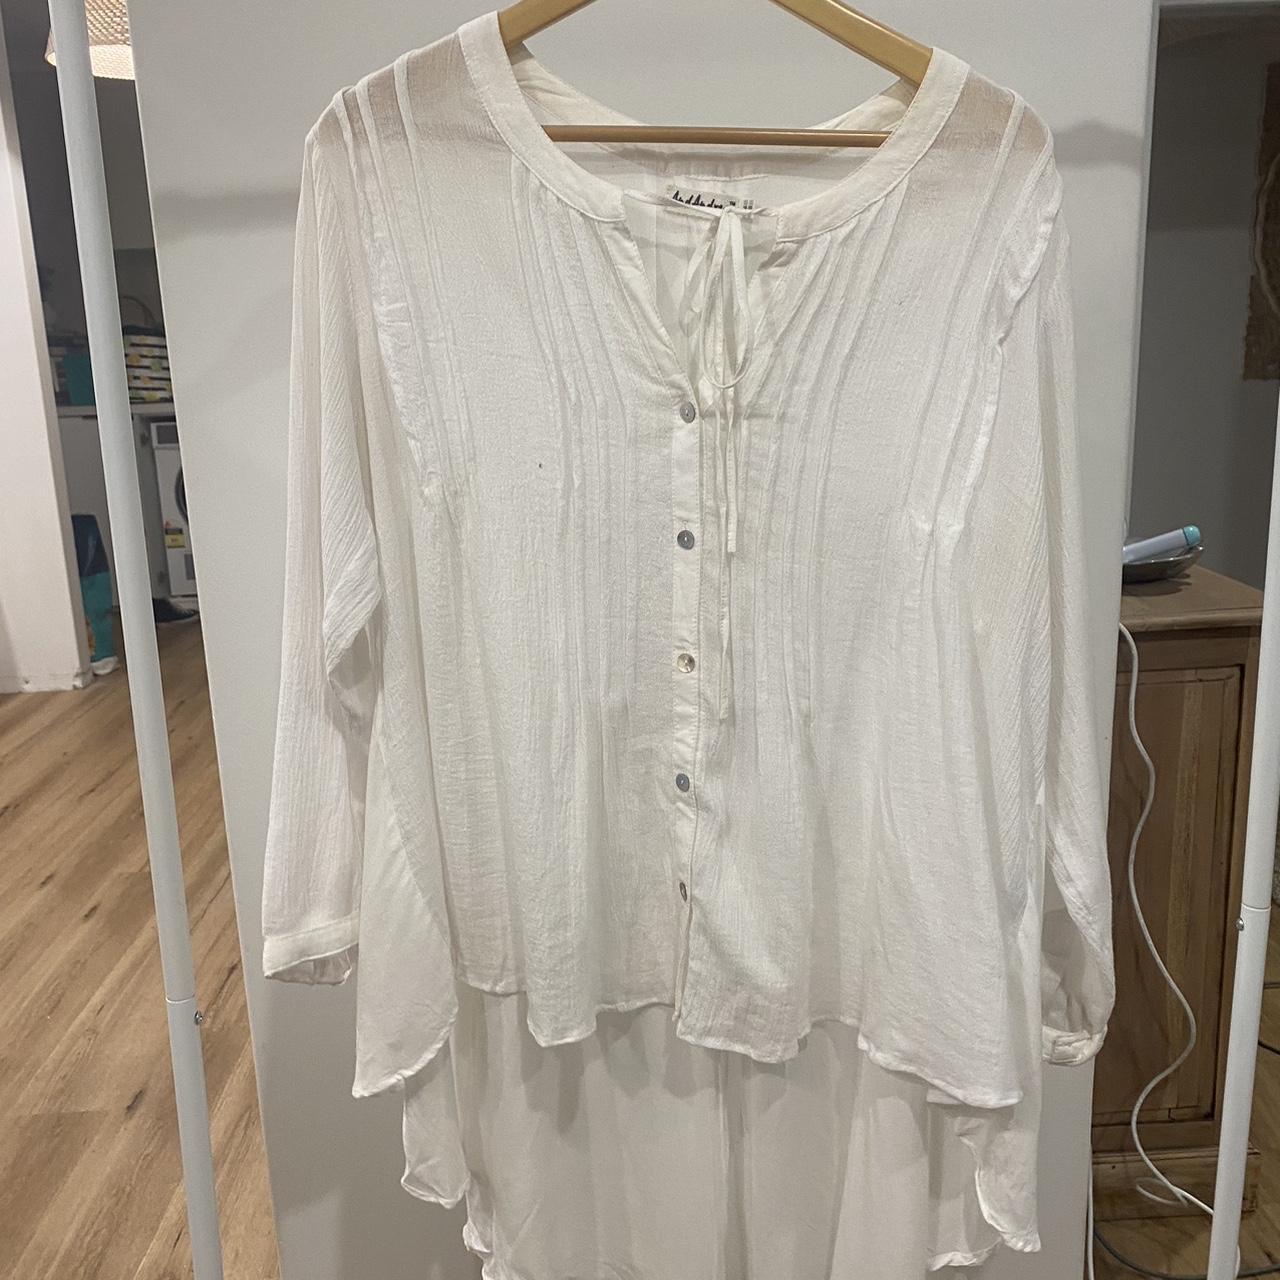 And Andrea Oversized shirt - One Size Would fit an... - Depop